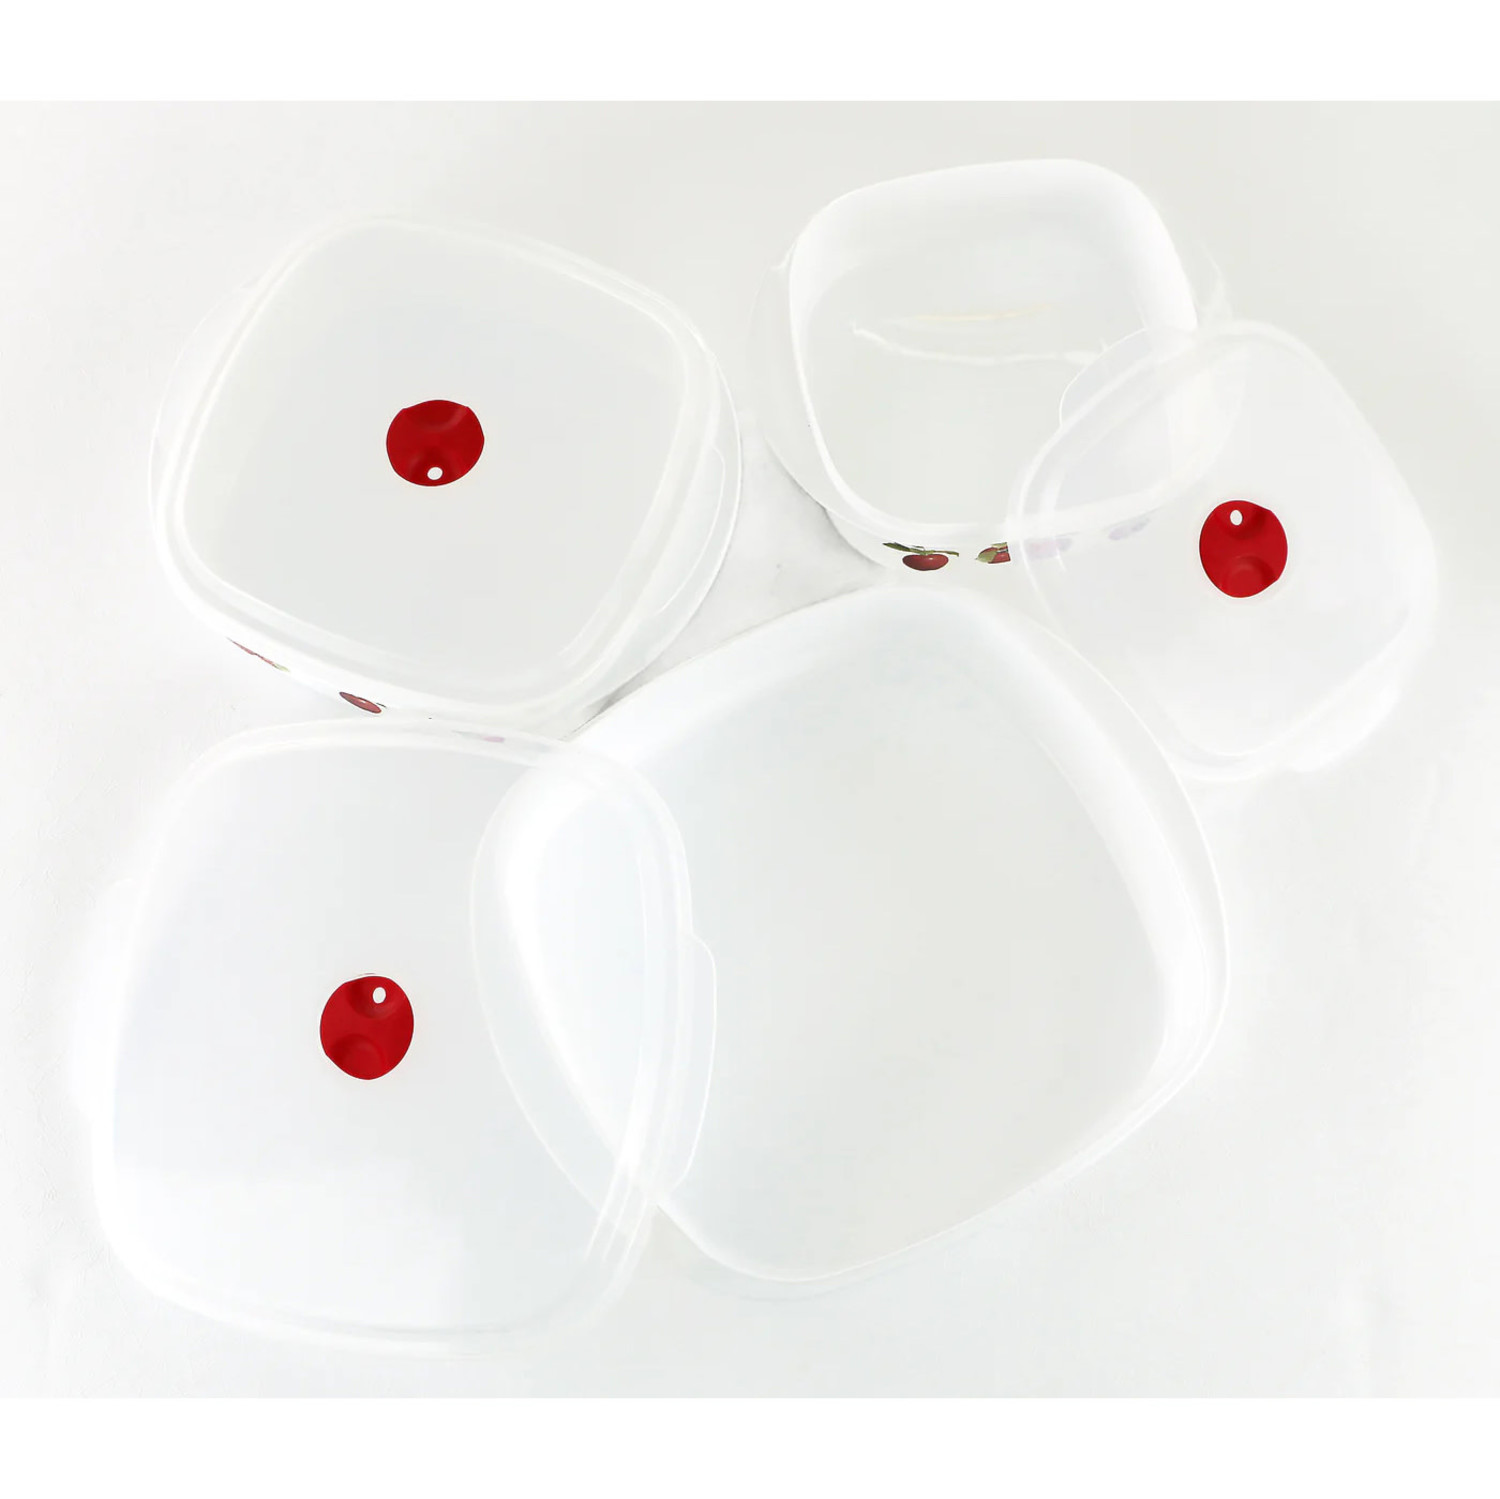 tupperware s/3, apples (microwave safe) - Whisk